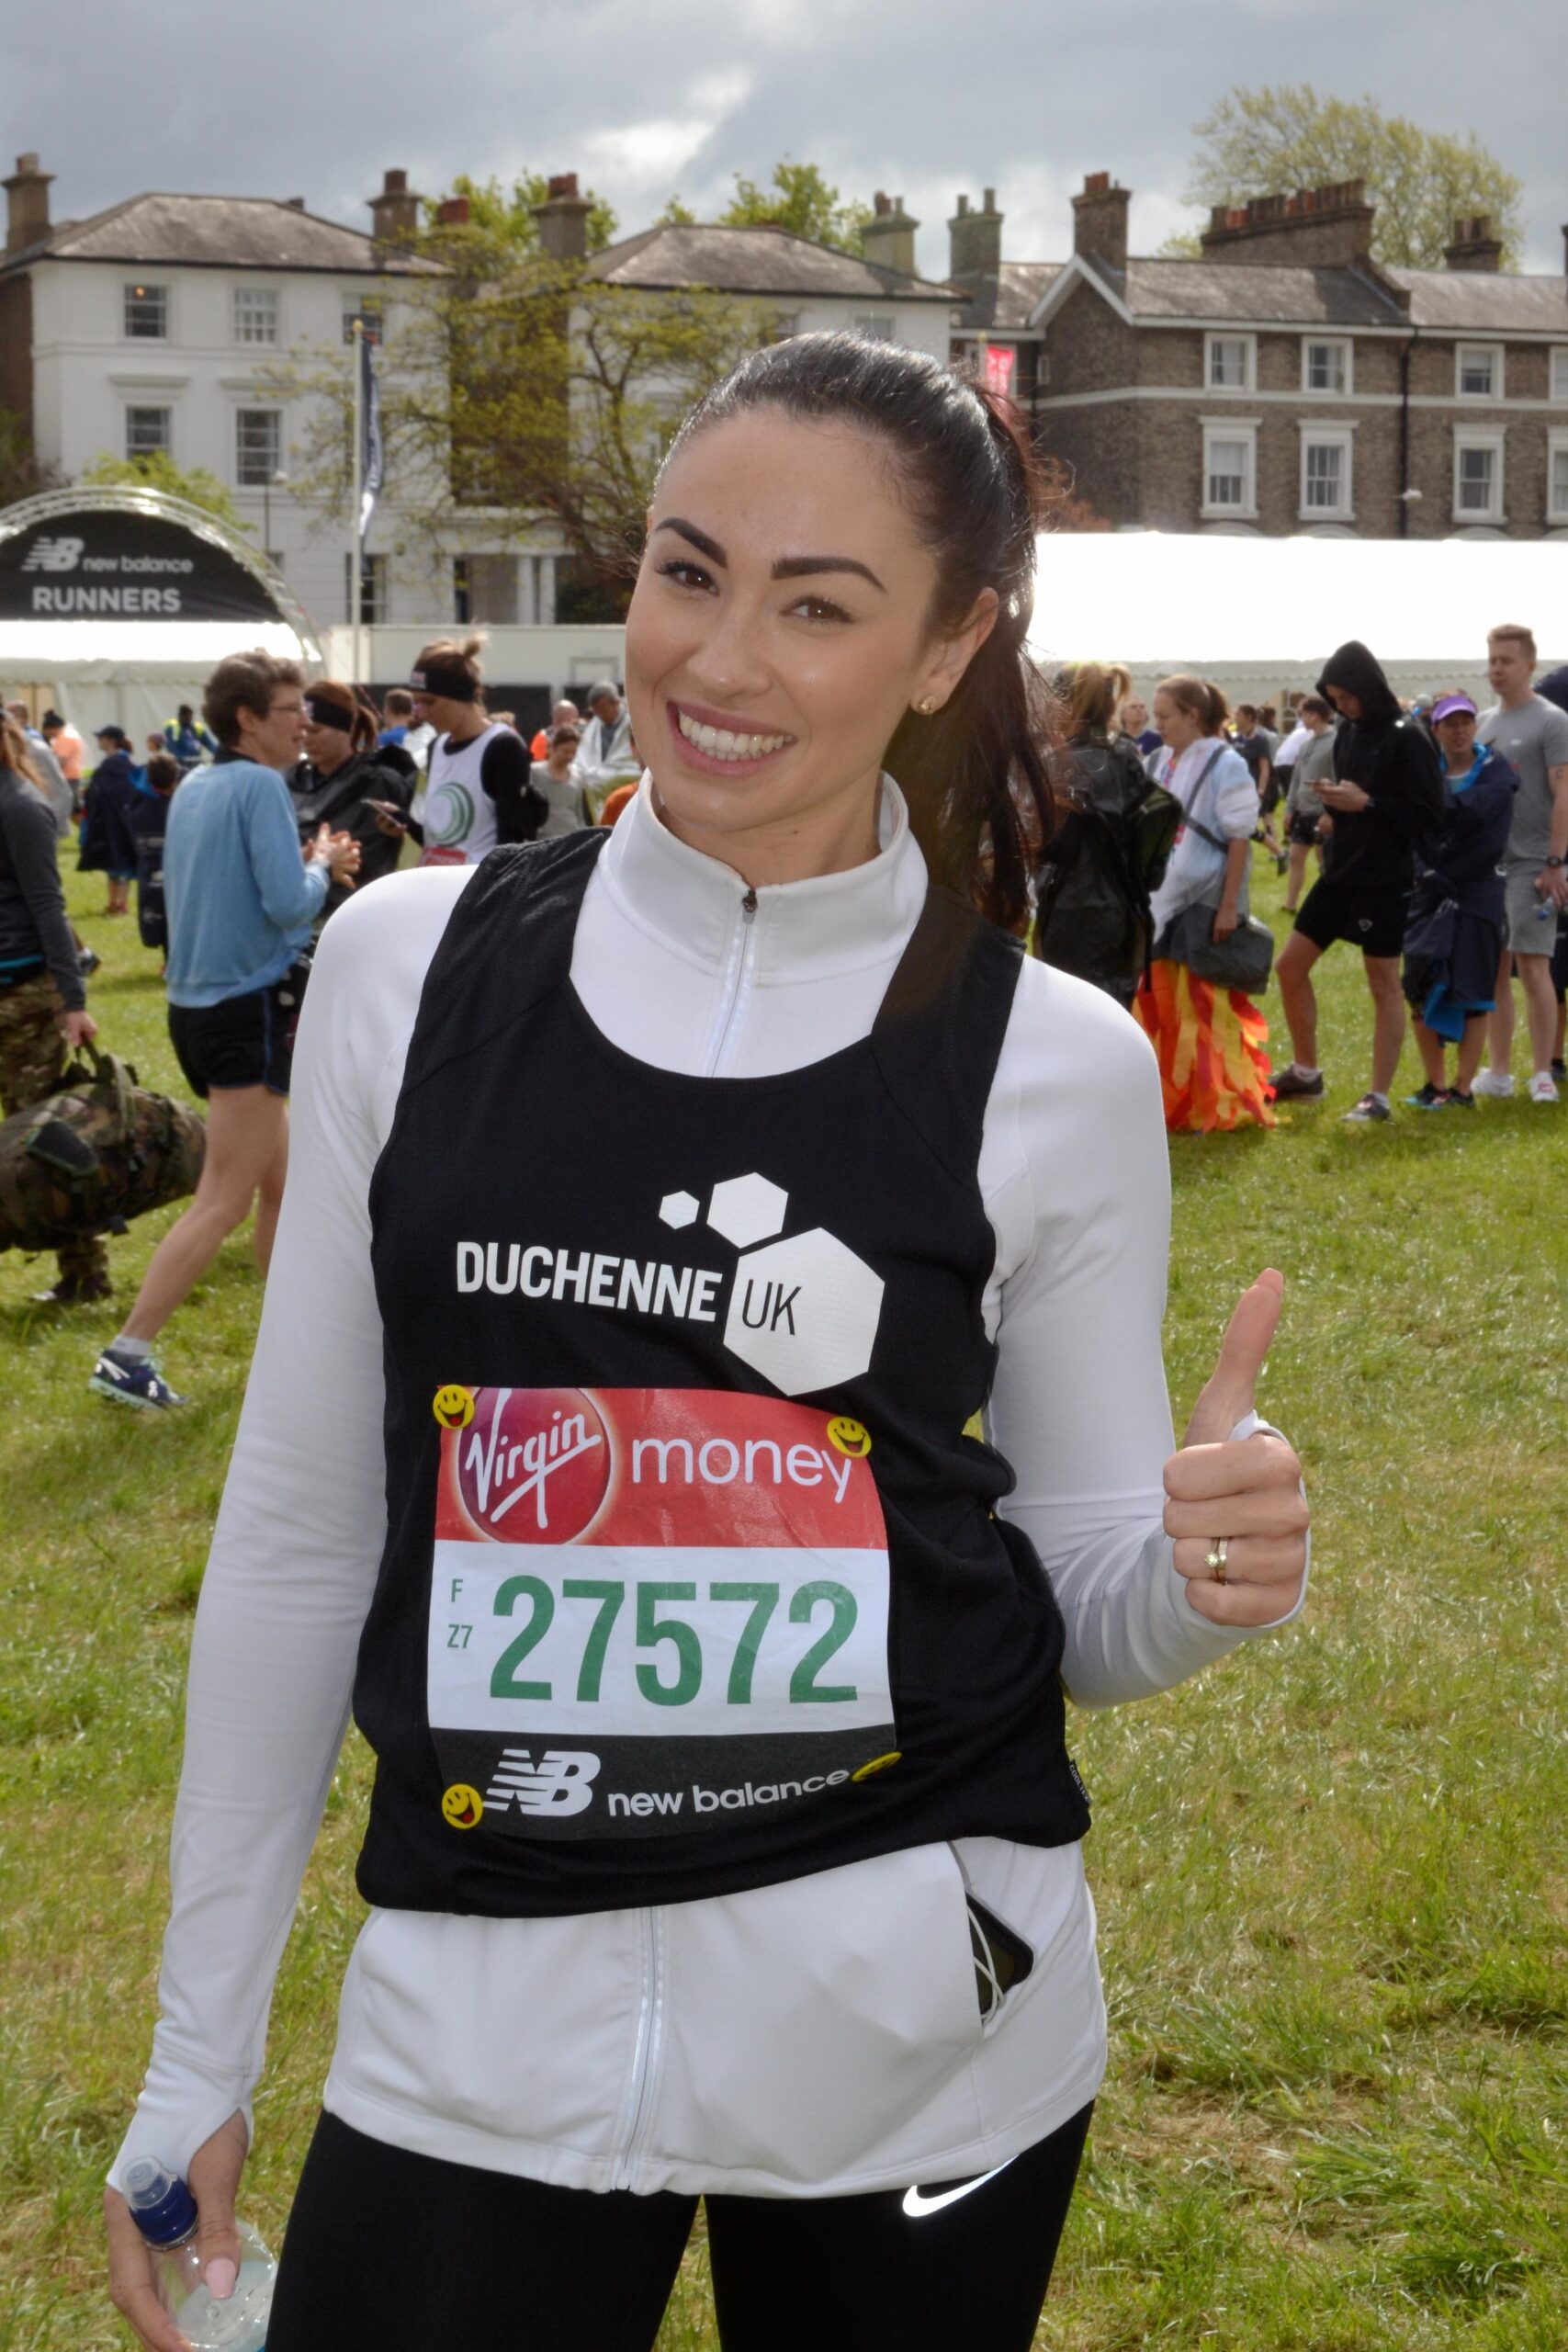 Hannah posing with a thumbs up before London Marathon